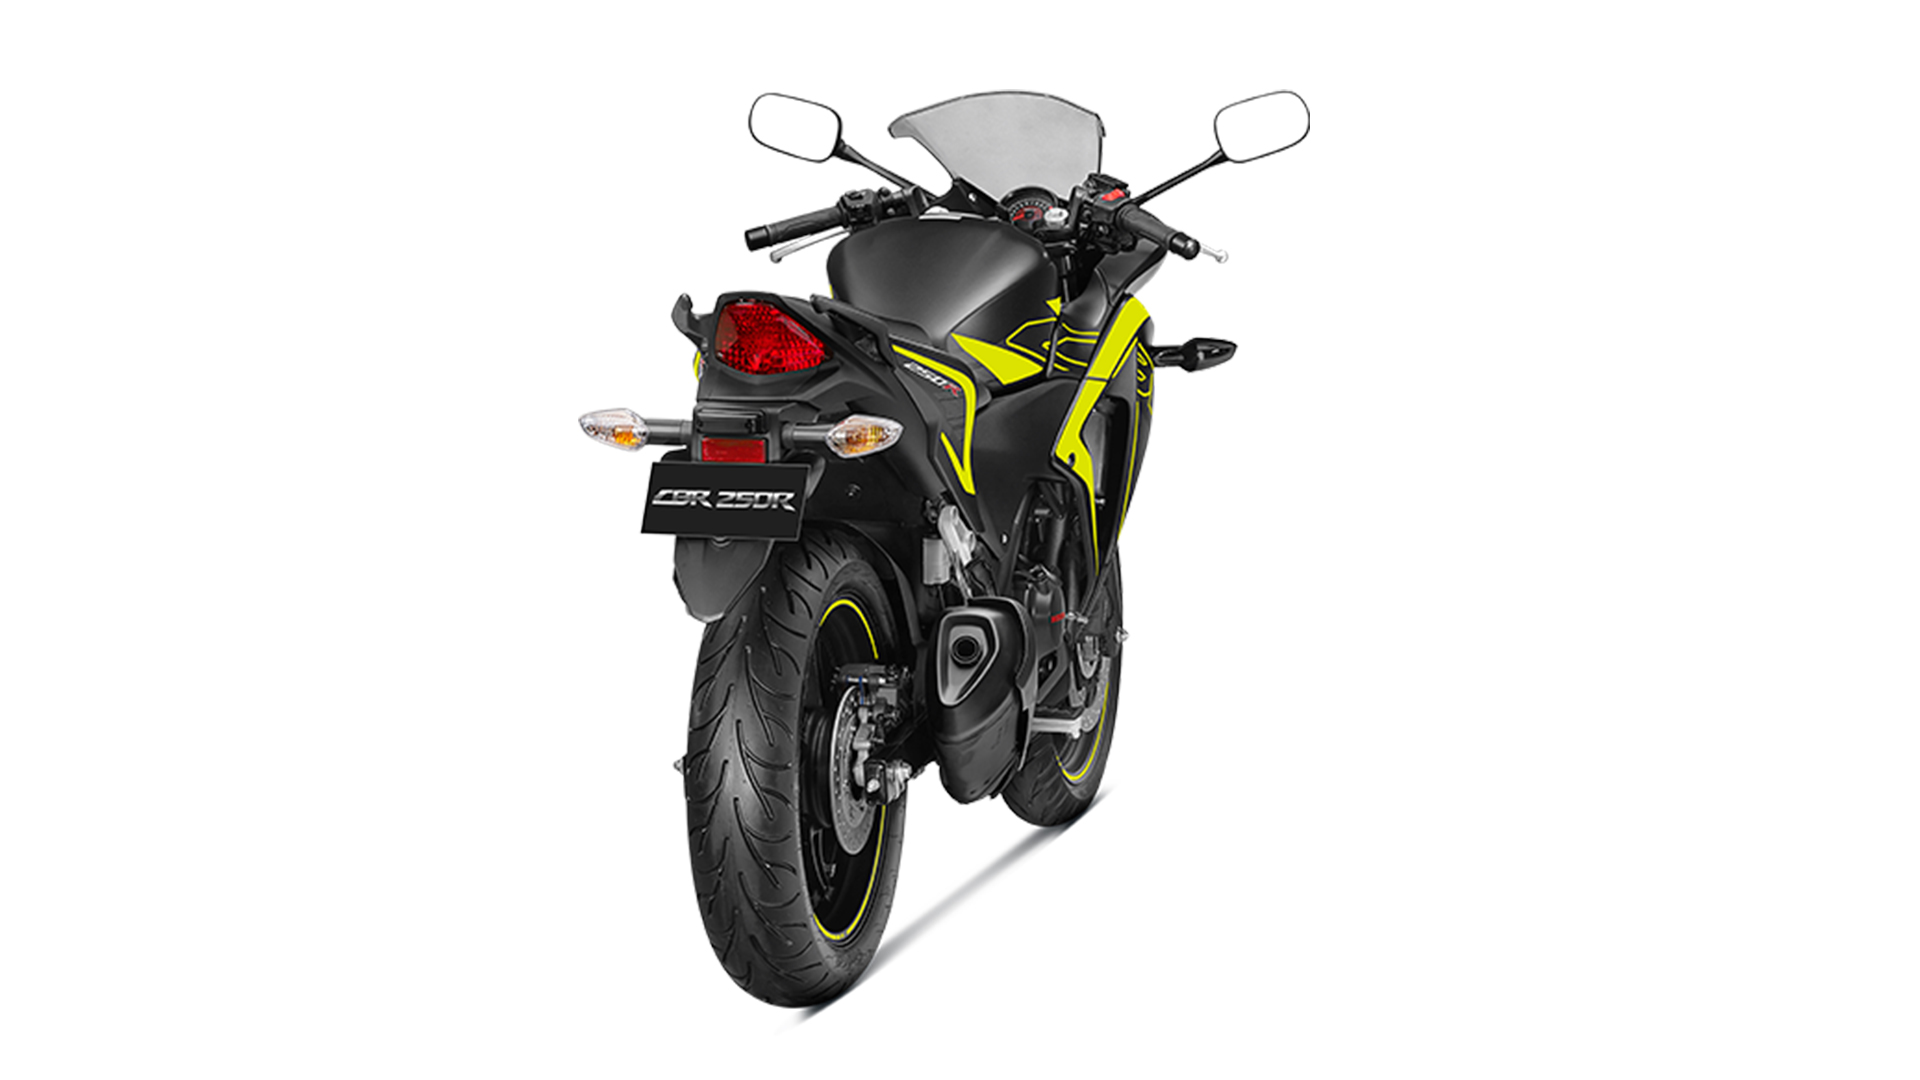 Honda Cbr250r 18 Price Mileage Reviews Specification Gallery Overdrive